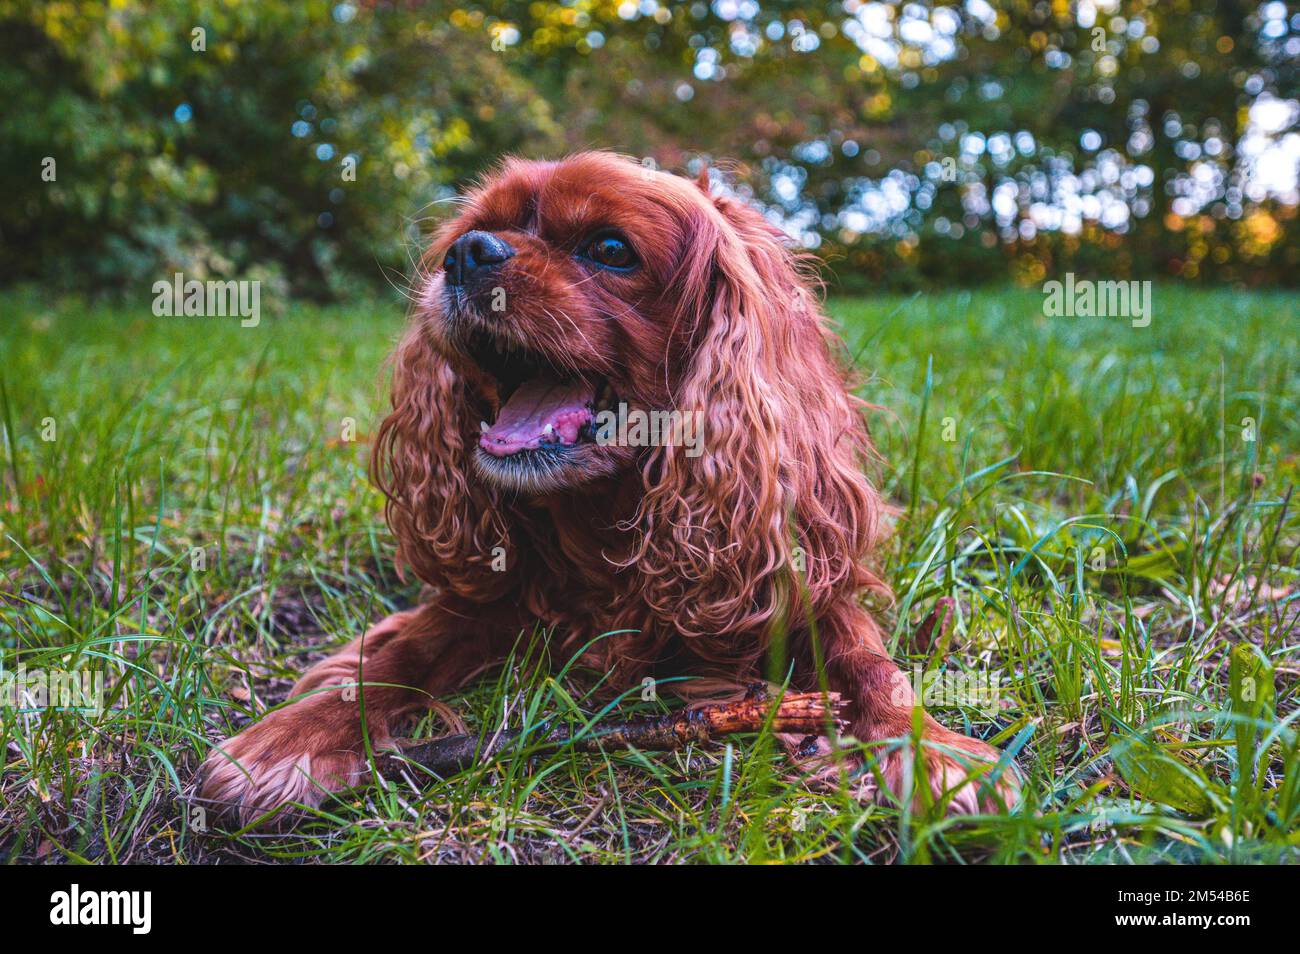 A dog (Cavalier King Charles Spaniel) with brown fur lies on a green meadow and opens its mouth to bark, Hannover, Lower Saxony, Germany Stock Photo